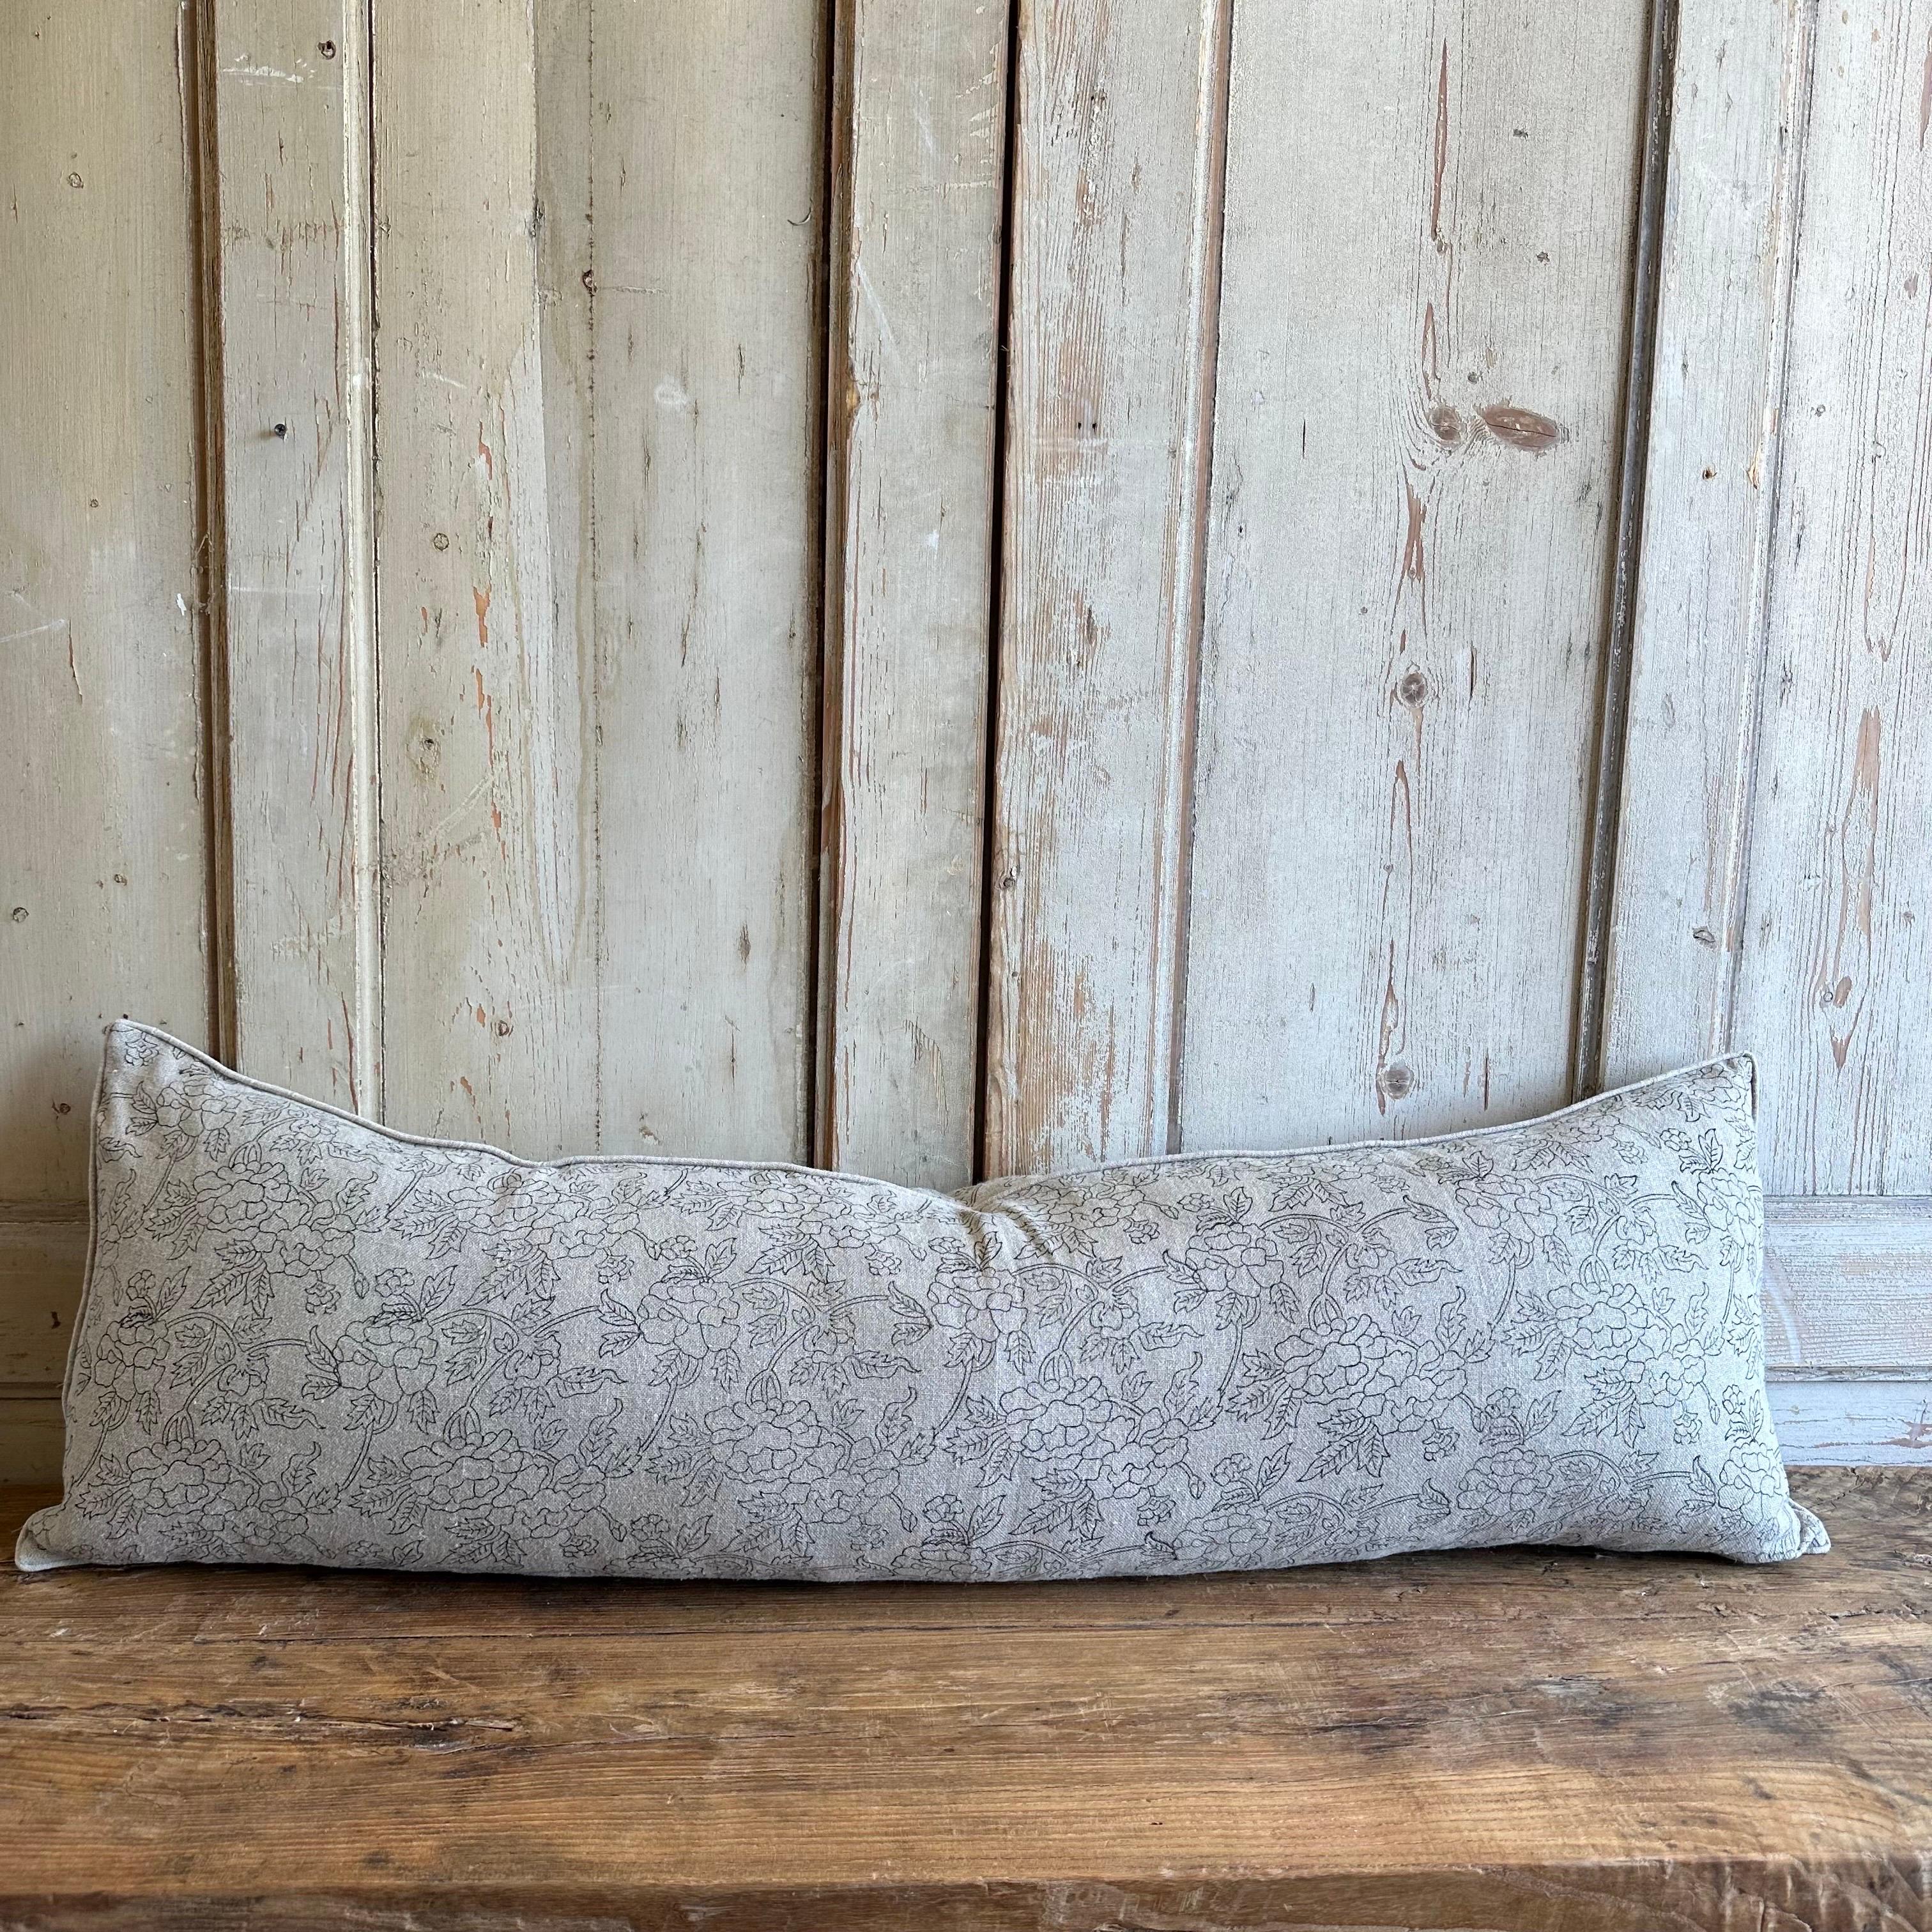 Custom Block Printed Natural Linen Lumbar Pillow Natural In New Condition For Sale In Brea, CA